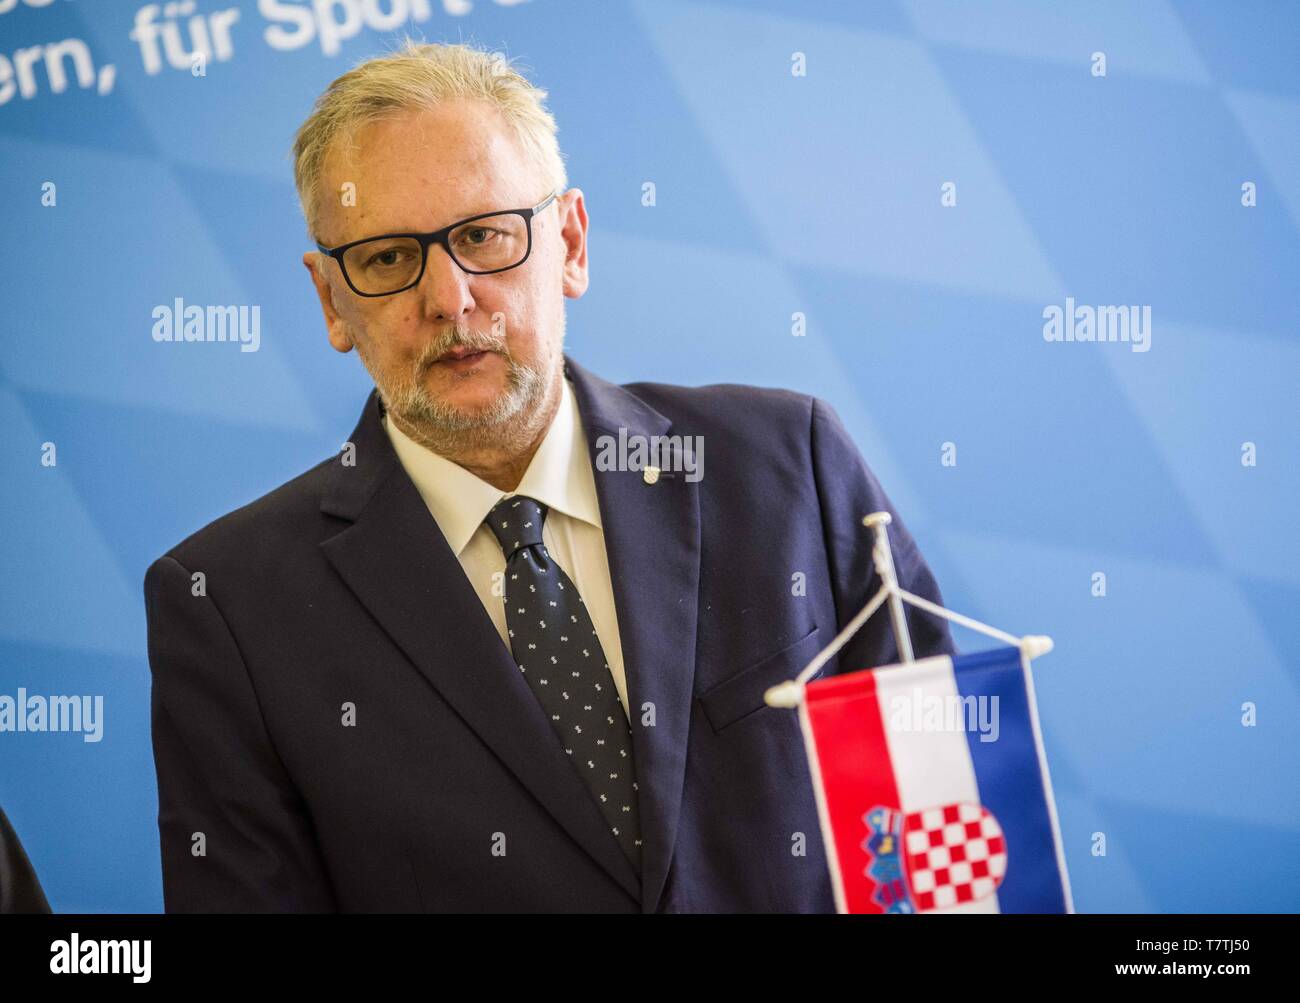 Munich, Bavaria, Germany. 9th May, 2019. Croatian Interior Minister DAVOR BOZINOVIC (Davor BoÅ¾inoviÄ‡) visited his Bavarian counterpart JOACHIM HERRMANN in Munich to discuss such themes as migration, the external European Union borders, entrance of Croatia into the Schengen Area, and the 2020 EU Council presidency which will be taken over by Croatia. Minister Bozinovic addressed allegations by NGOs that Croatian police are committing illegal pushbacks of refugees and migrants back into Bosnia, with the police illegally entering Bosnia. The Minister has said he is aware of the allegations an Stock Photo